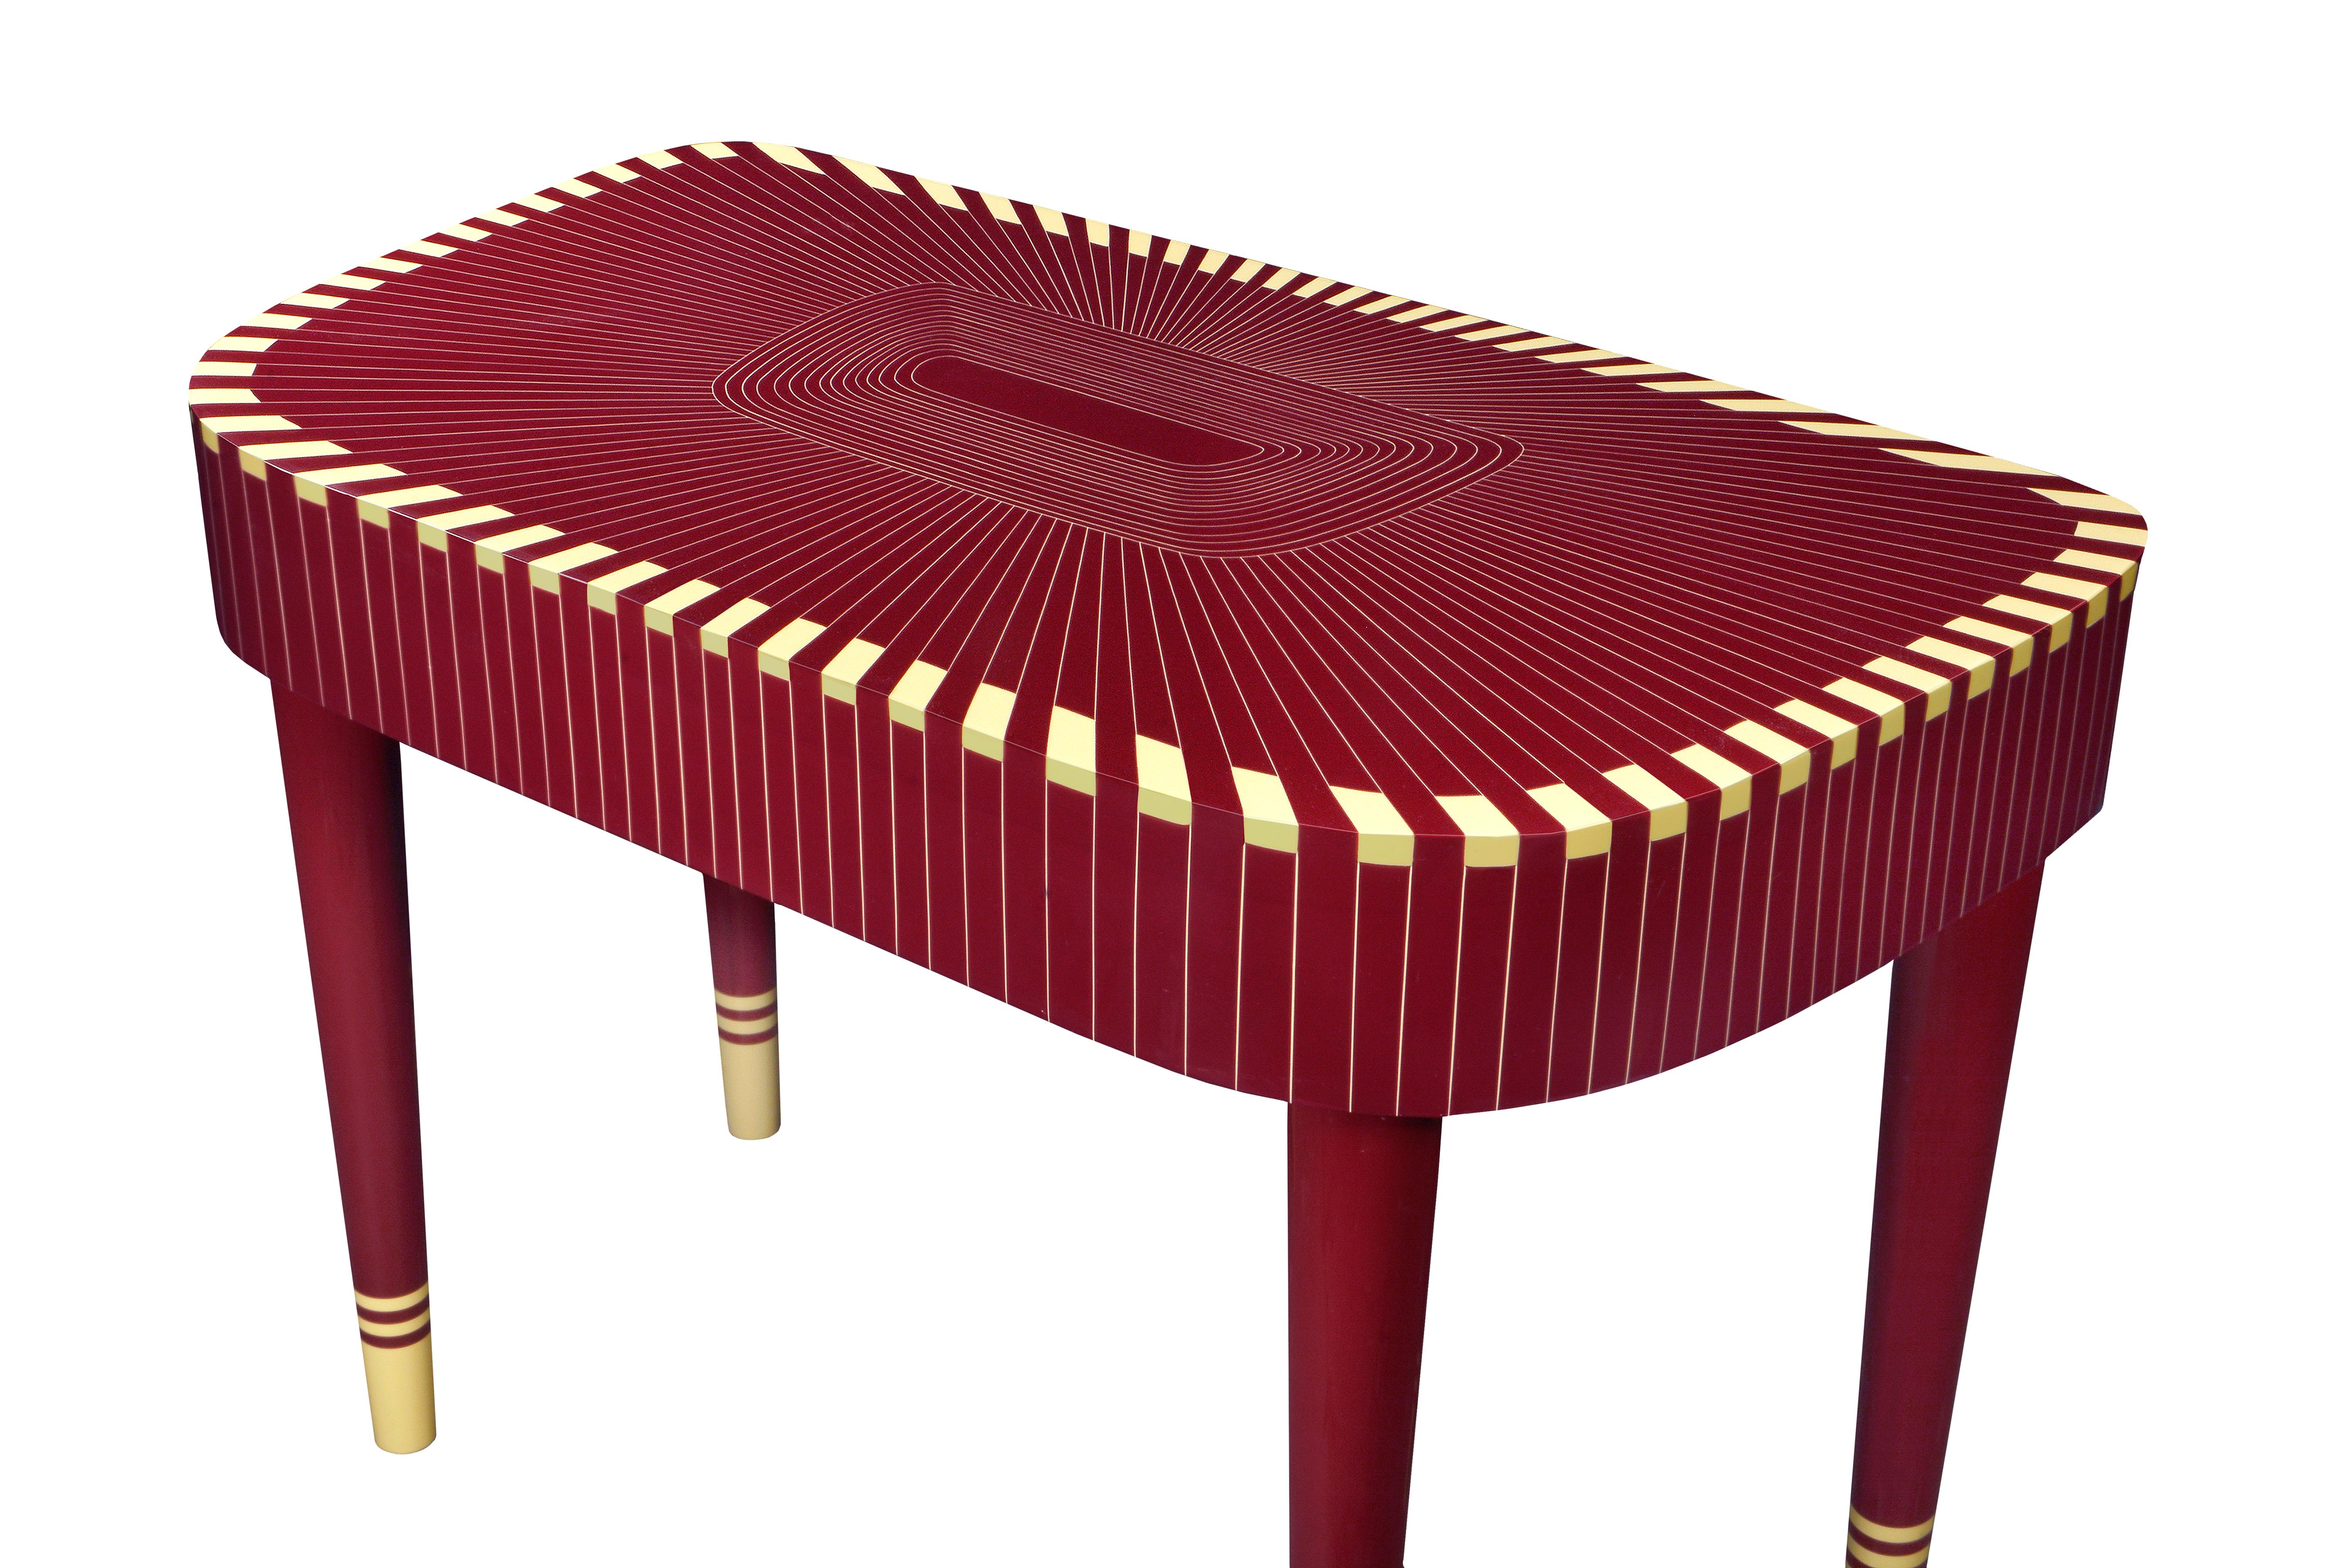 Paris Bureau Study Desk Writing Table by Matteo Cibic is an extraordinary console/writing table, with two drawers. It is available in a range of colors, which can be customized according to the space.

India's handicrafts are as multifarious as its